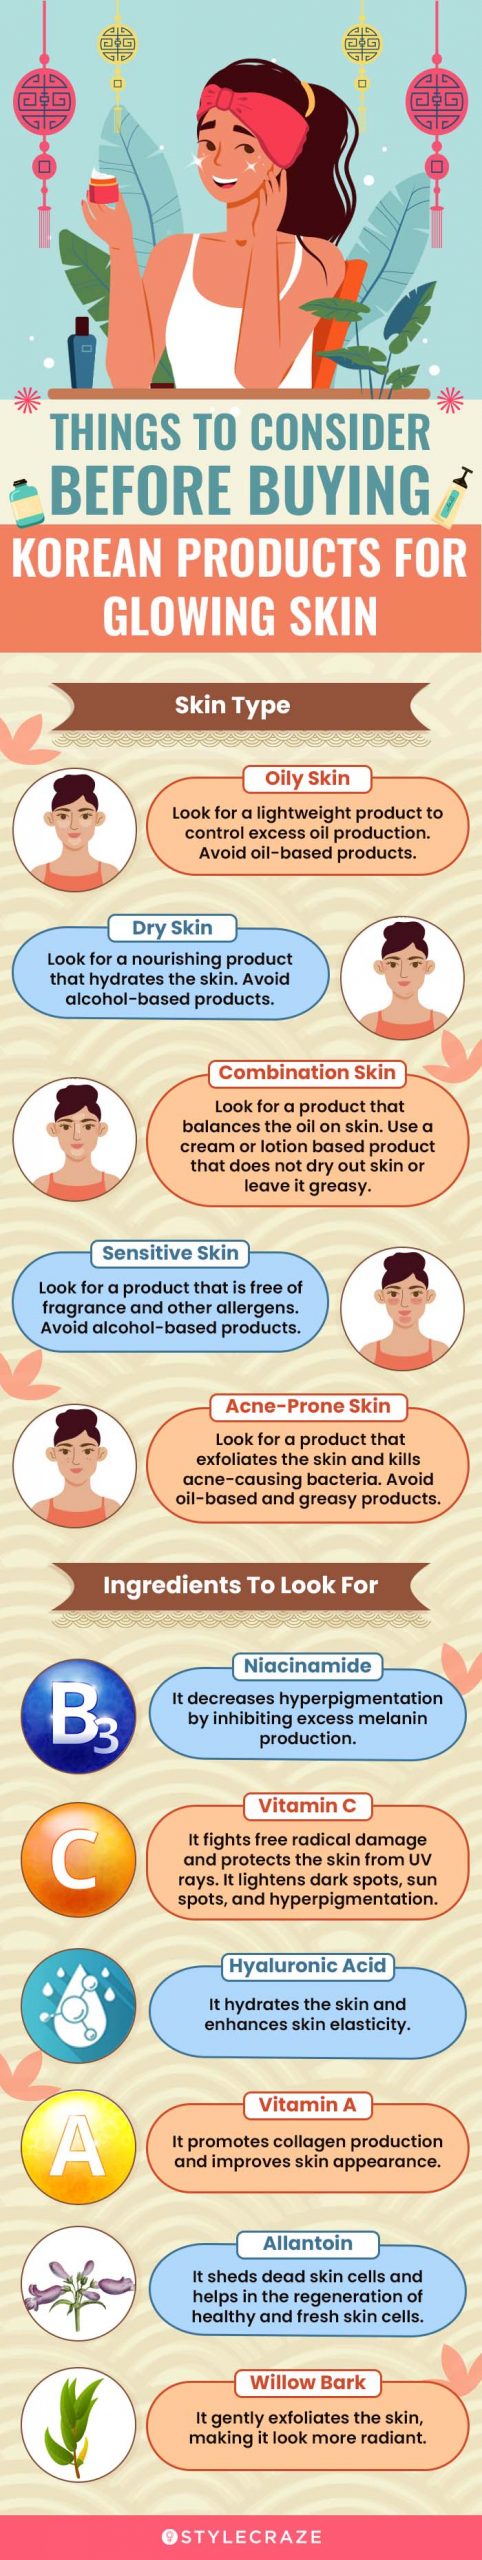 Things To Consider Before Buying Korean Products (infographic)